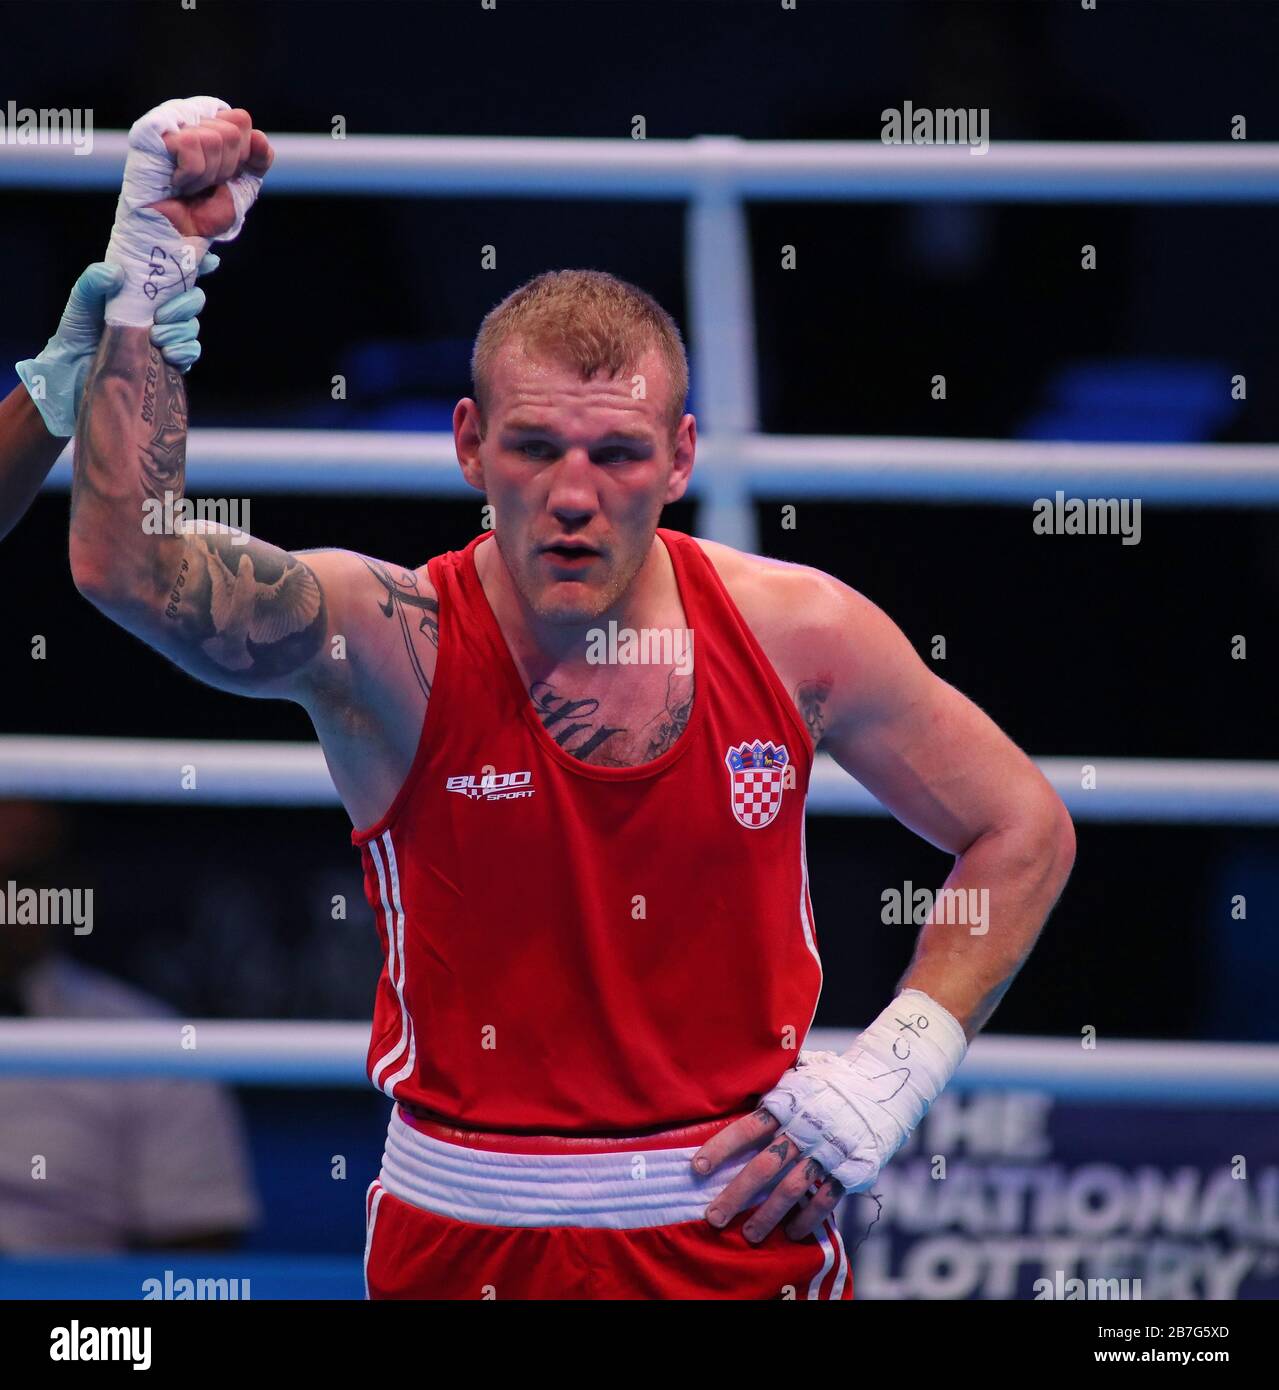 London, UK. 15th Mar, 2020. Luka Plantic of Croatia celebrates after  winning the Men's Light-heavyweight preliminary against Umar Dzambekov of  Austria during The Road to Tokyo European Olympic Boxing Qualification in  London,